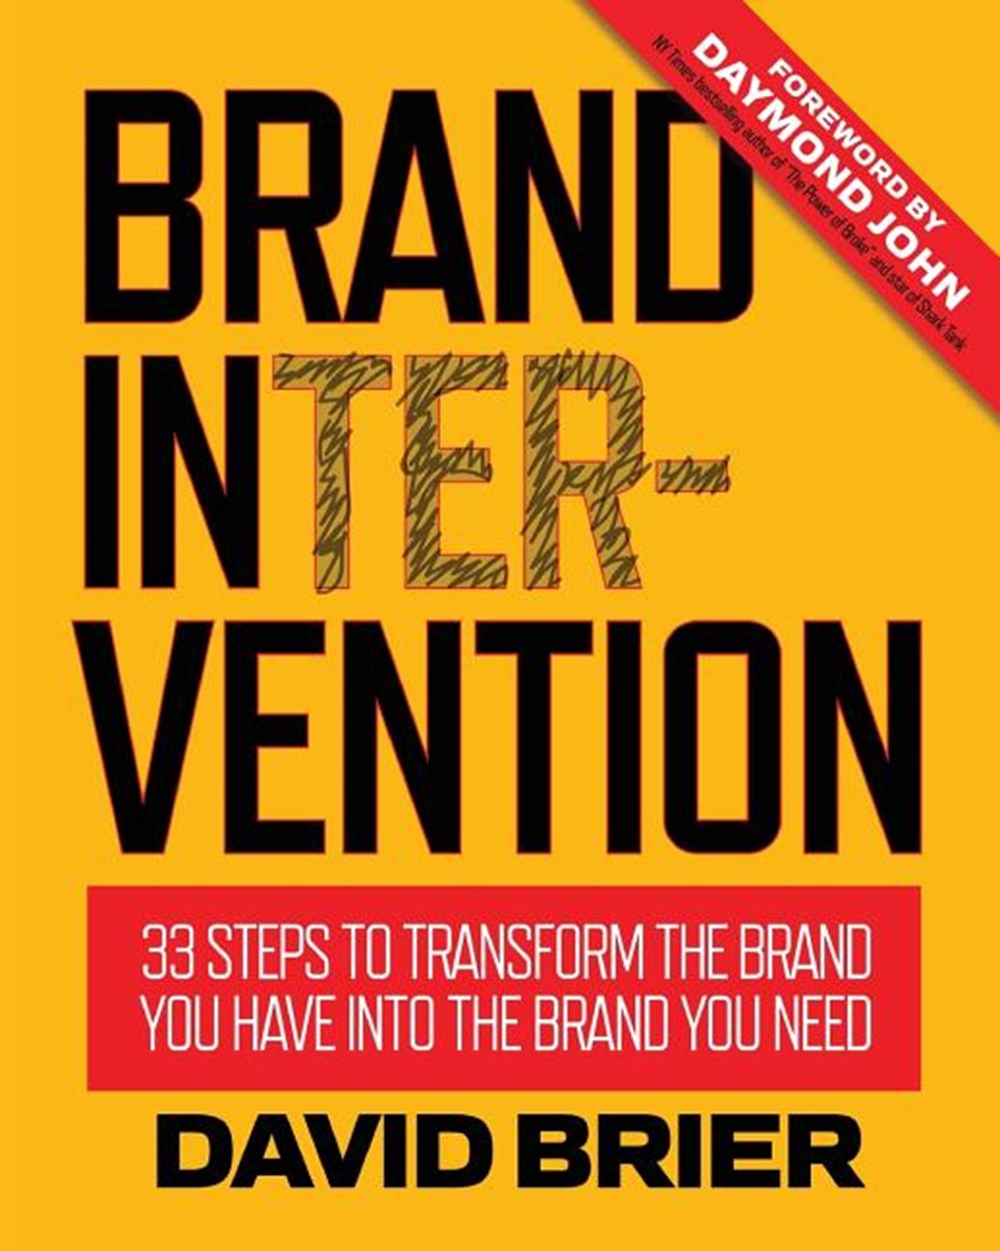 Brand Intervention 33 Steps to Transform the Brand You Have into the Brand You Need